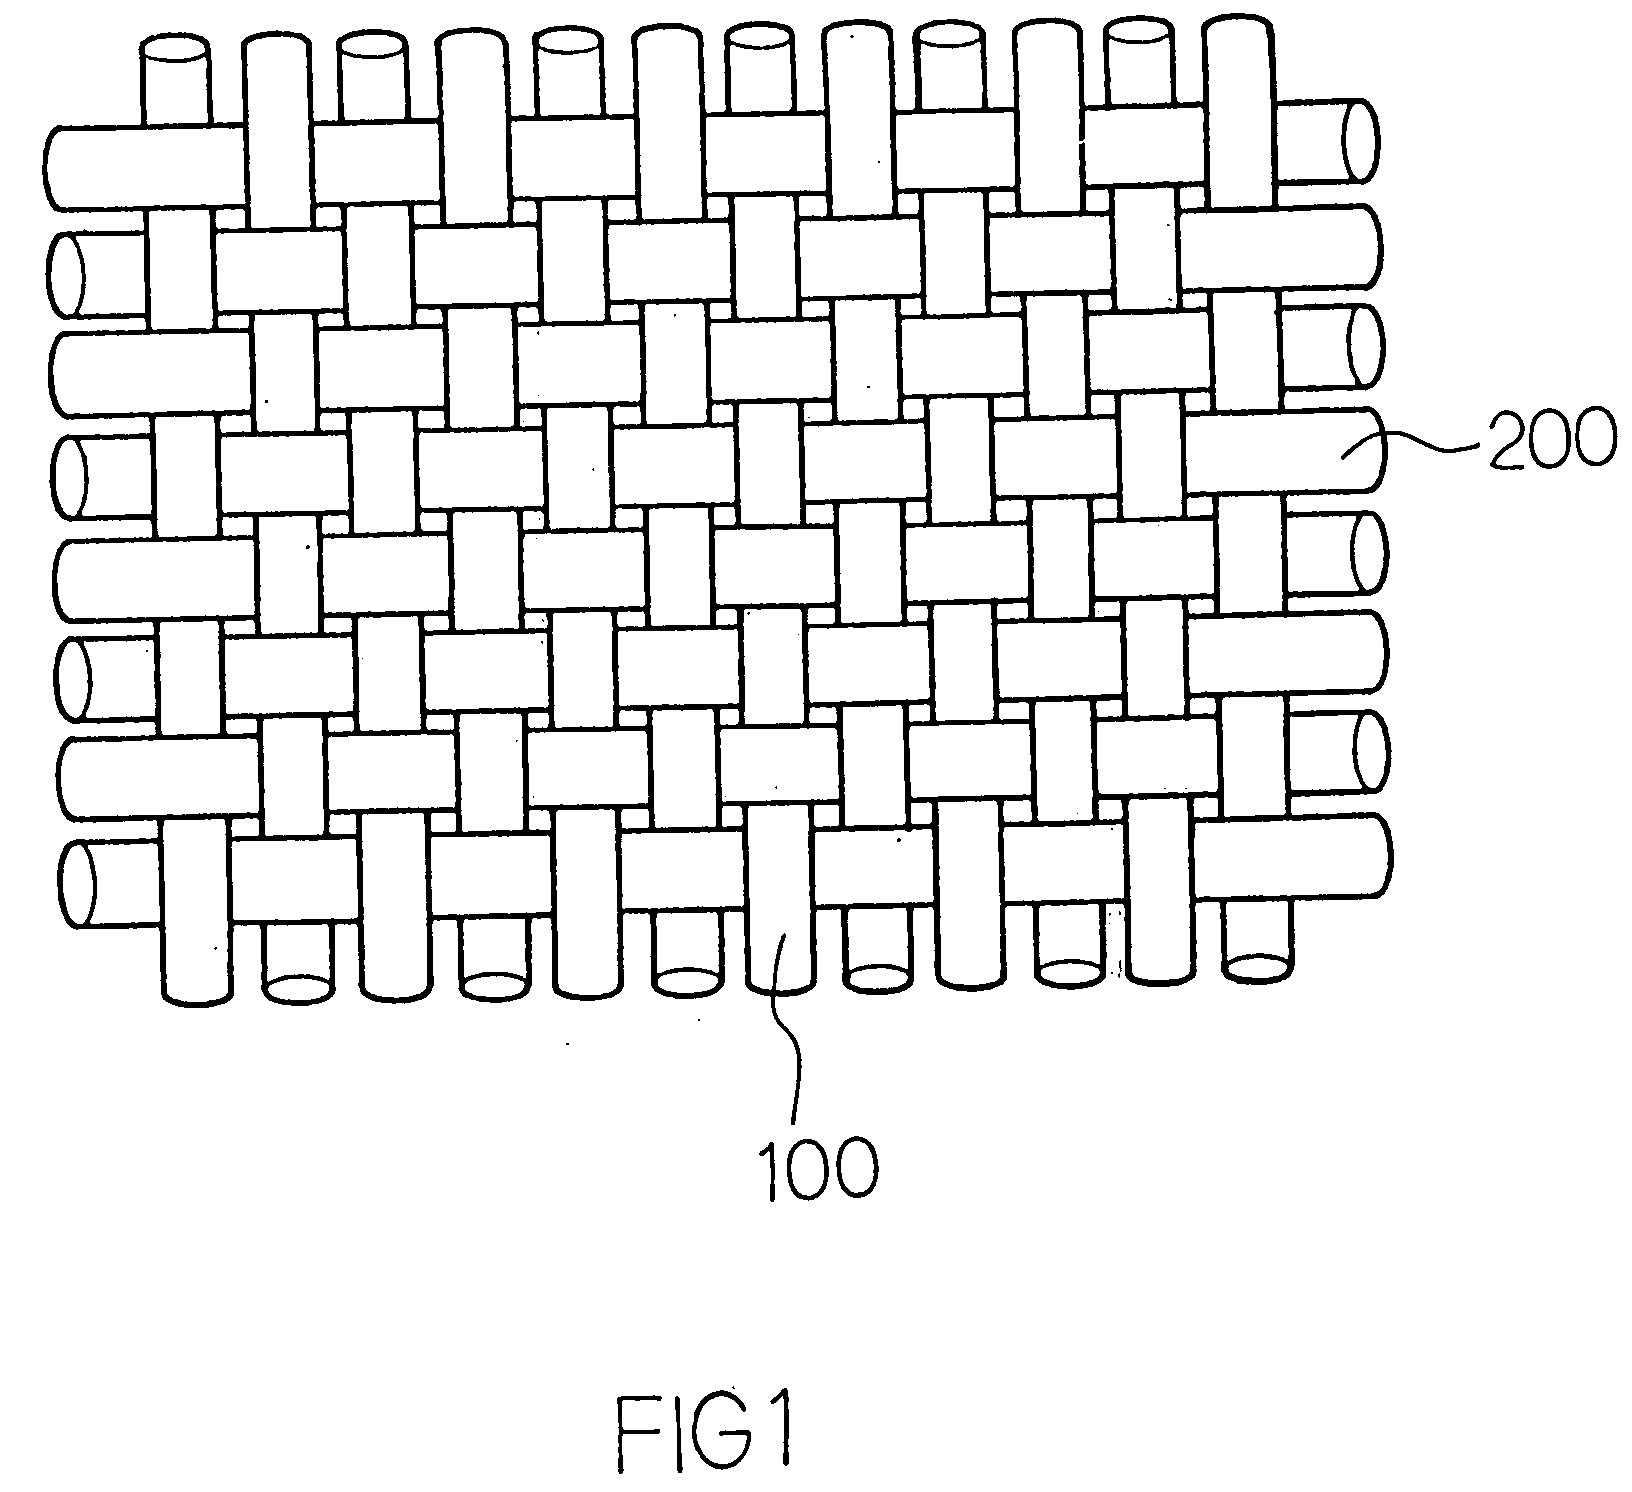 Structure of carbon cloth